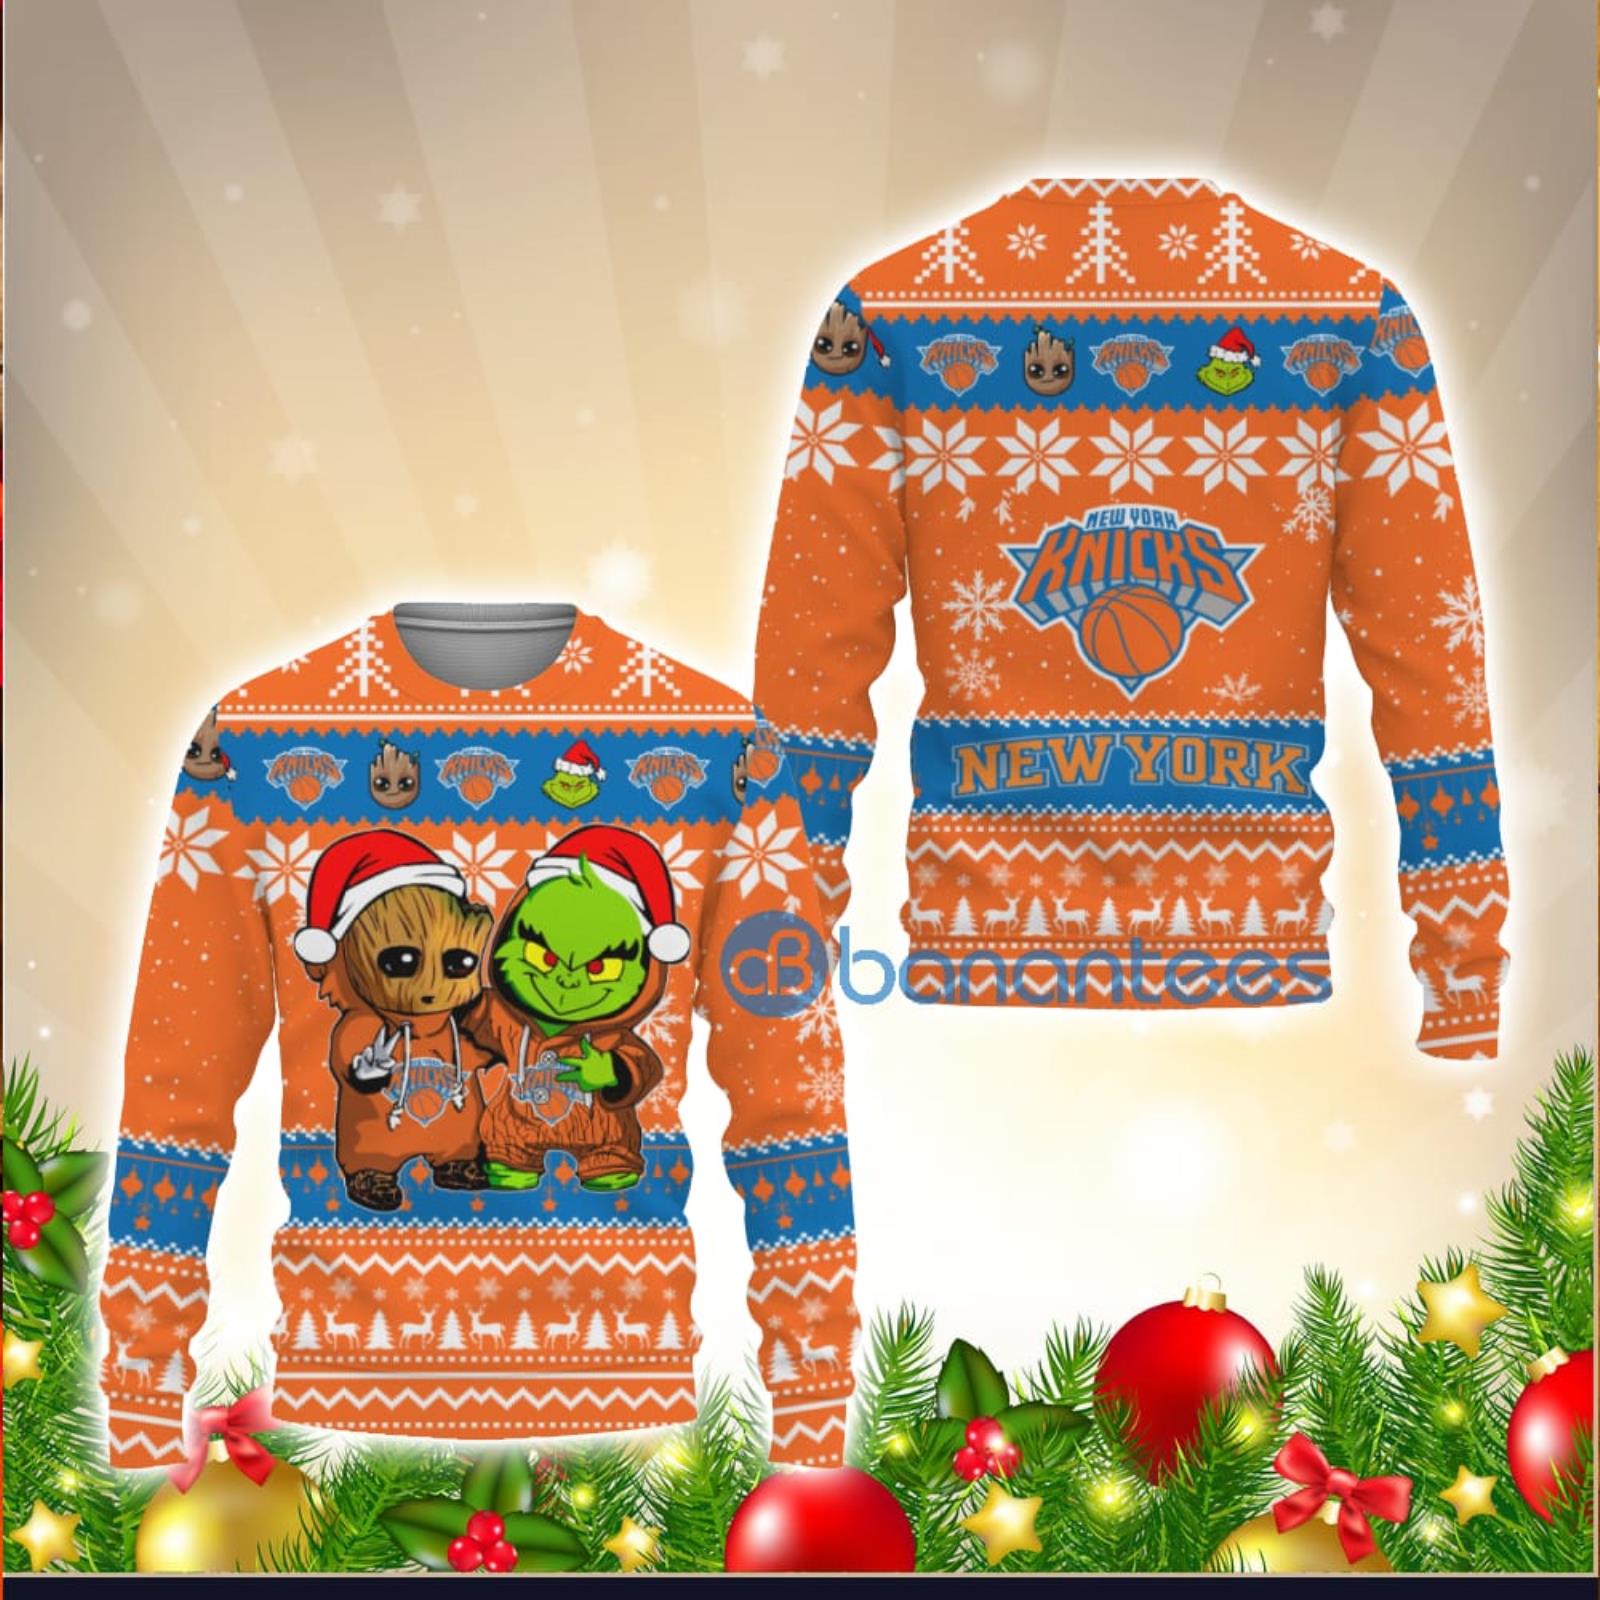 New York Knicks Baby Groot And Grinch Best Friends 3D Chirstmas